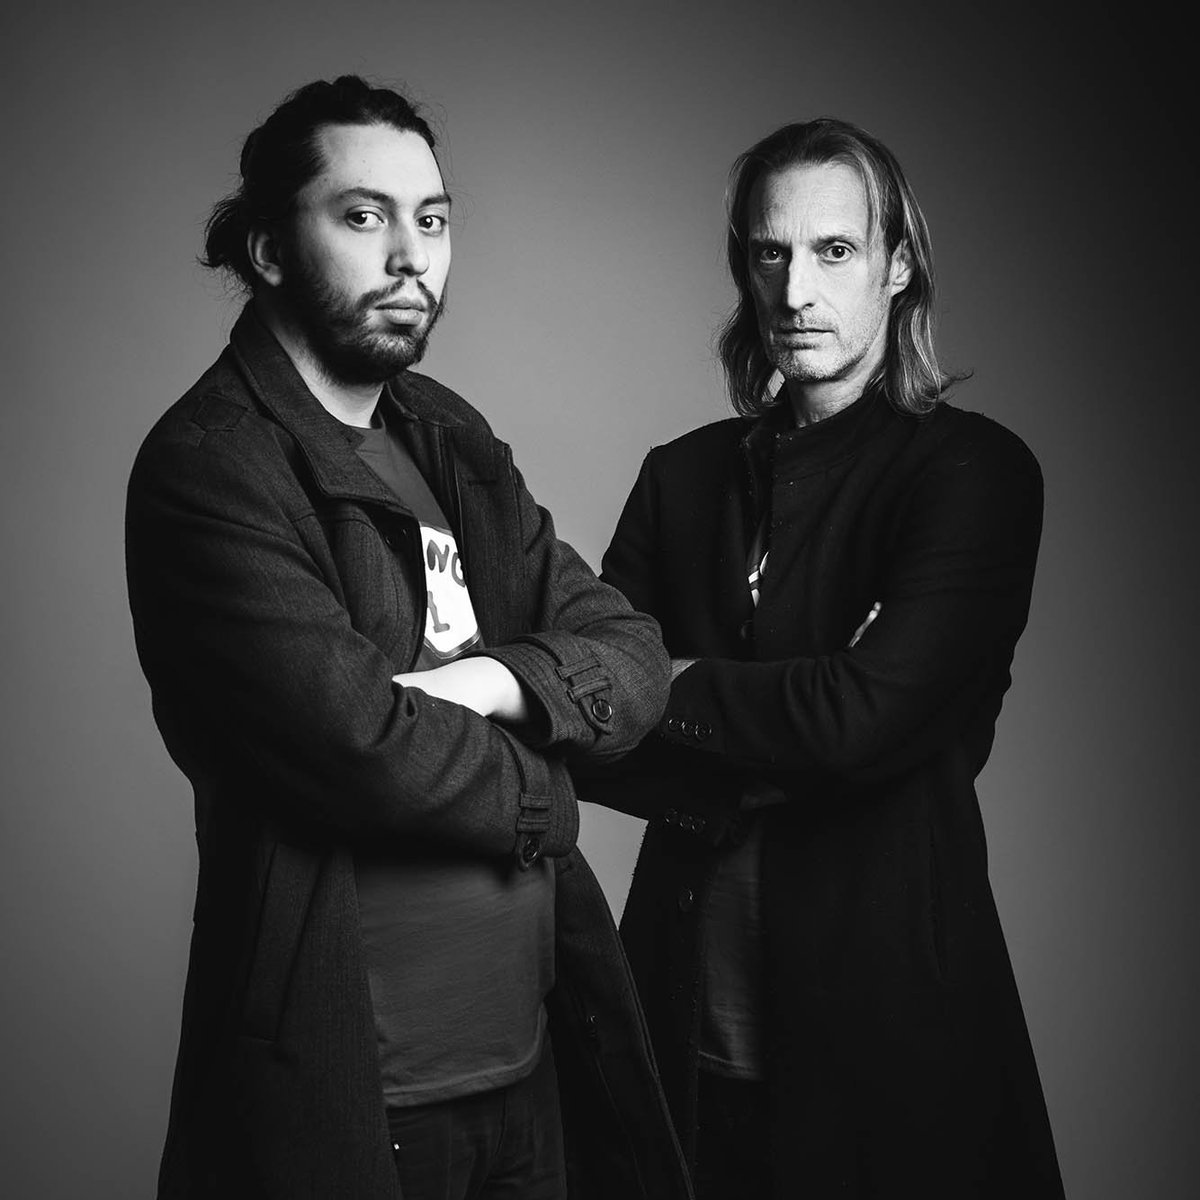 France-based duo @TheNoiseWhoRuns gets some love from @Songazine for EP 'Come and Join the Beautiful Army' (mastered at @TheCellStudio by @slightermusic), which is called complex and elegant #triphop within a discerning #newmusic roundup ~ tinyurl.com/nwr-songazine @BlazedRTs